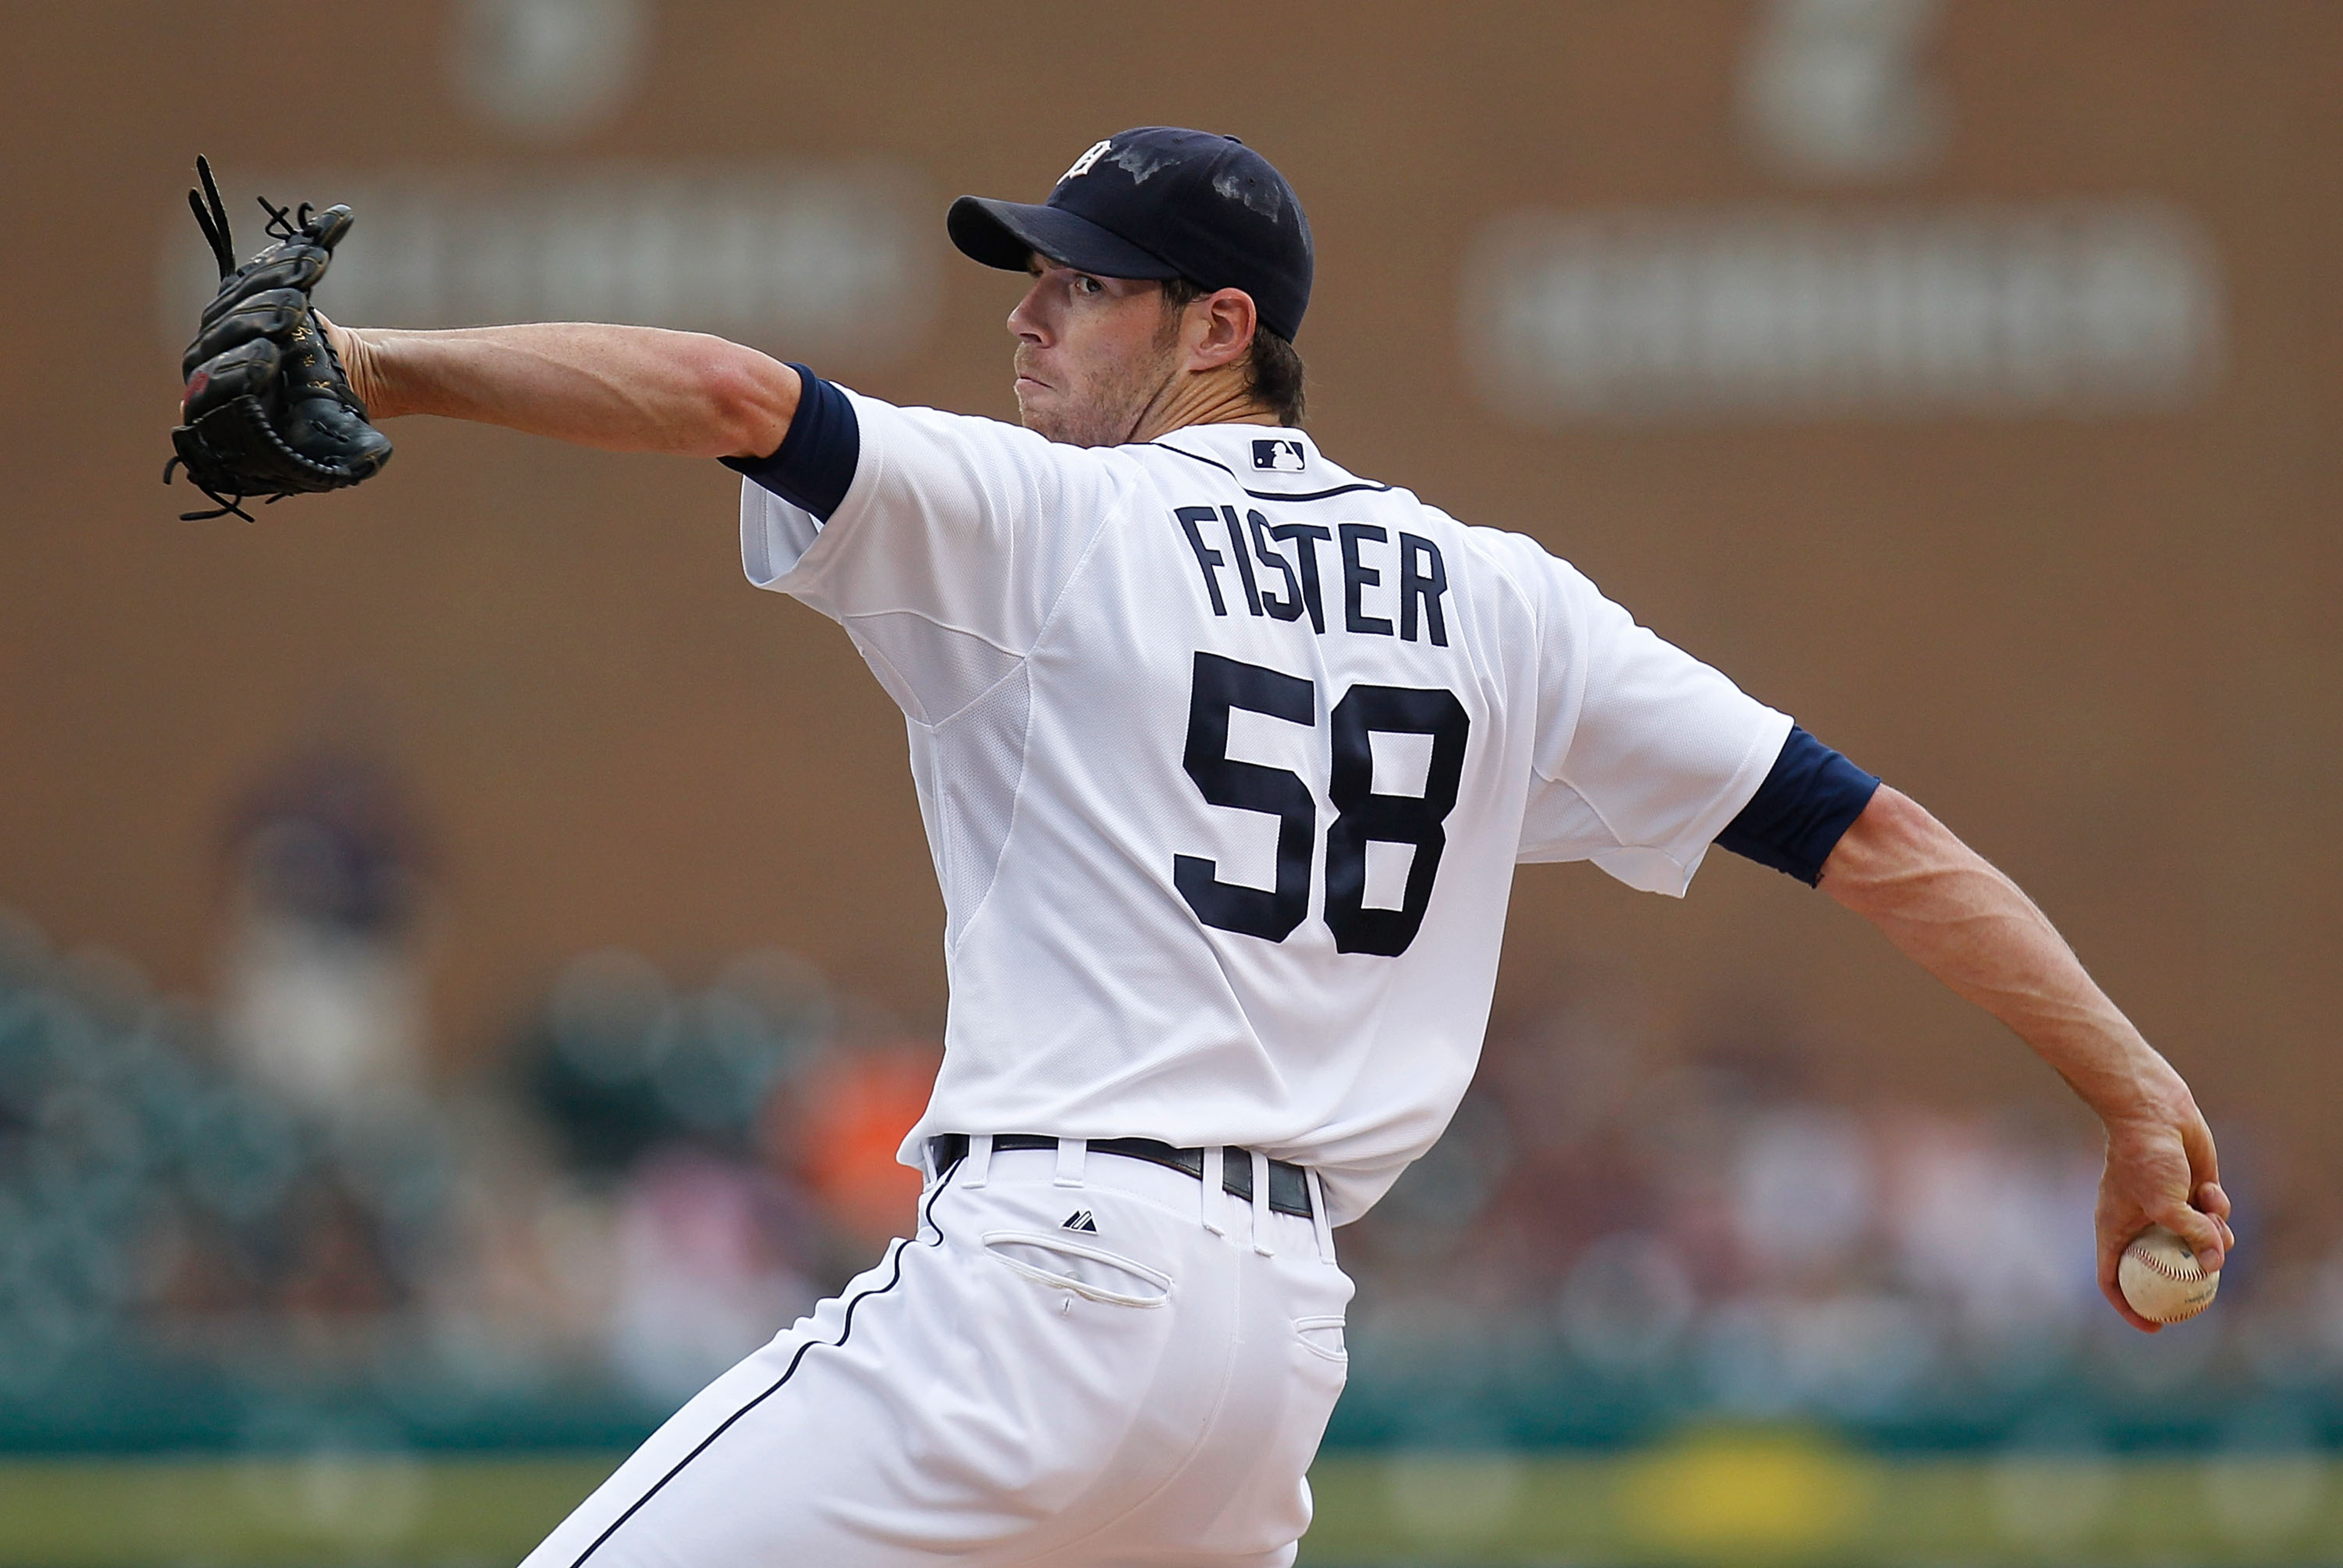 DETROIT, MI - JULY 18: Doug Fister #58 of the Detroit Tigers throws a first inning pitch while playing the Los Angeles Angels of Anaheim at Comerica Park on July 18, 2012 in Detroit, Michigan.  (Photo by Gregory Shamus/Getty Images)